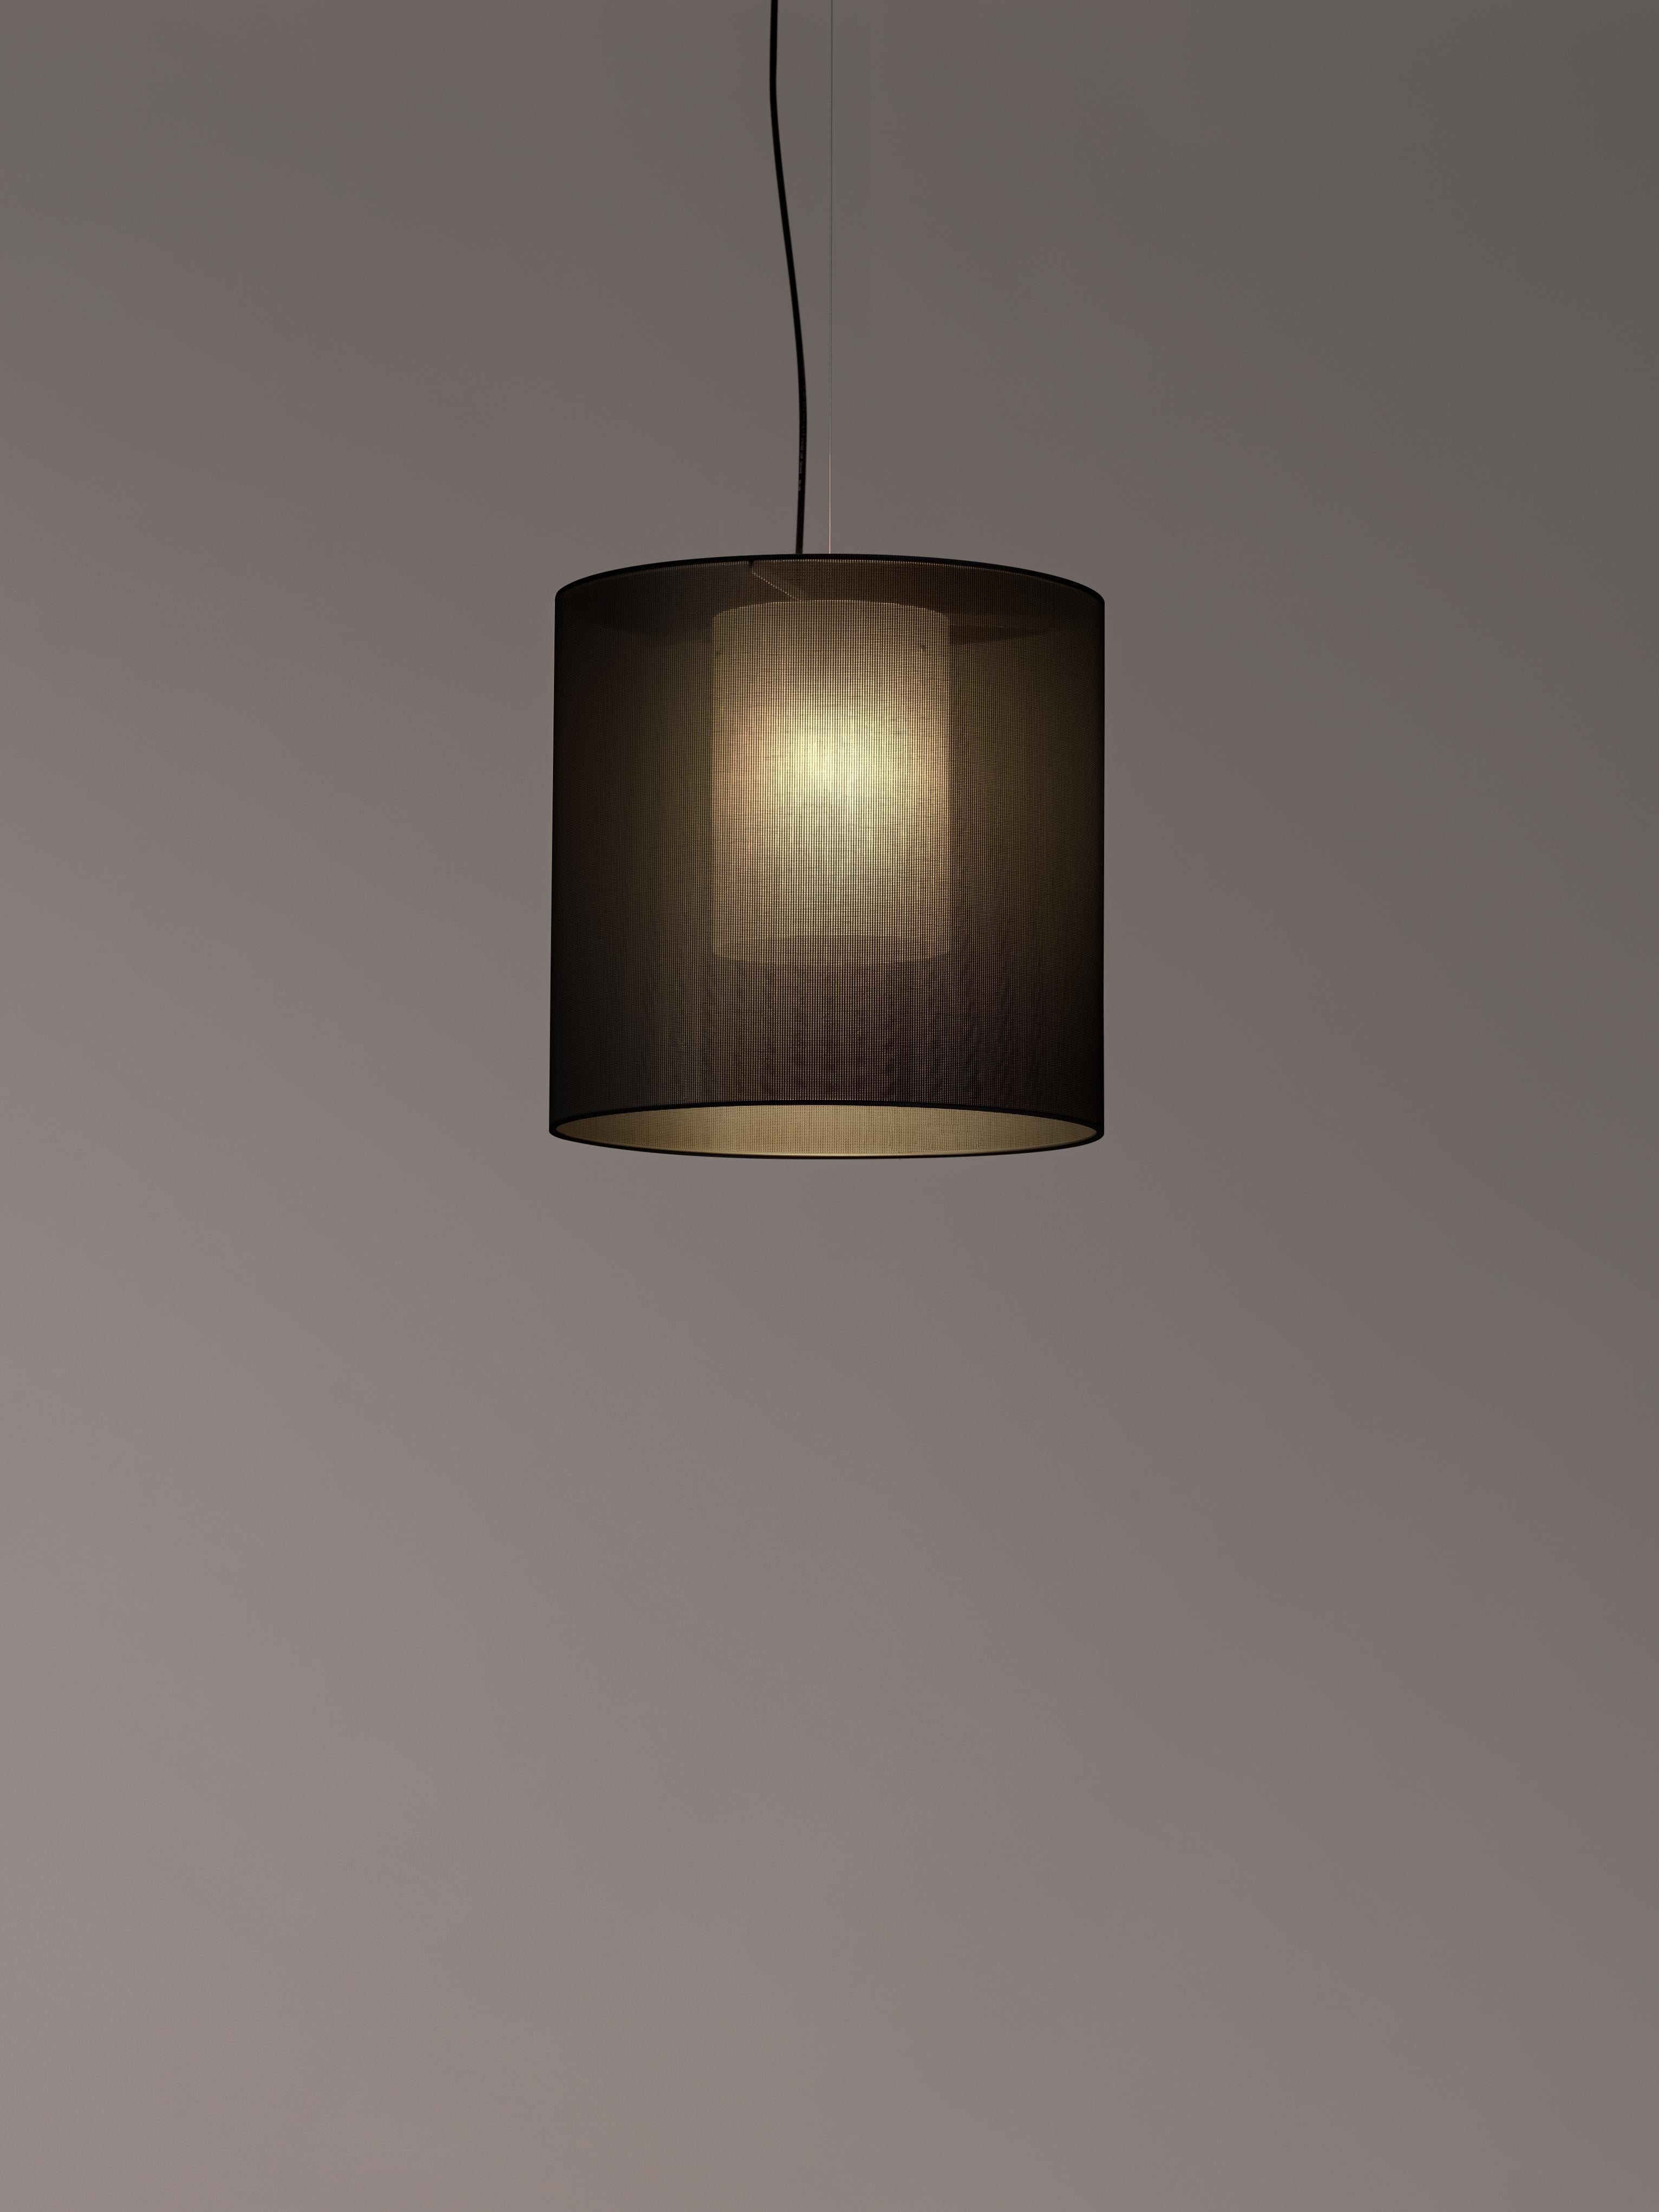 Black Moaré M pendant lamp by Antoni Arola
Dimensions: D 46 x H 45 cm
Materials: Metal, polyester.
Available in other colors and sizes.

Moaré’s multiple combinations of formats and colours make it highly versatile. The series takes its name from